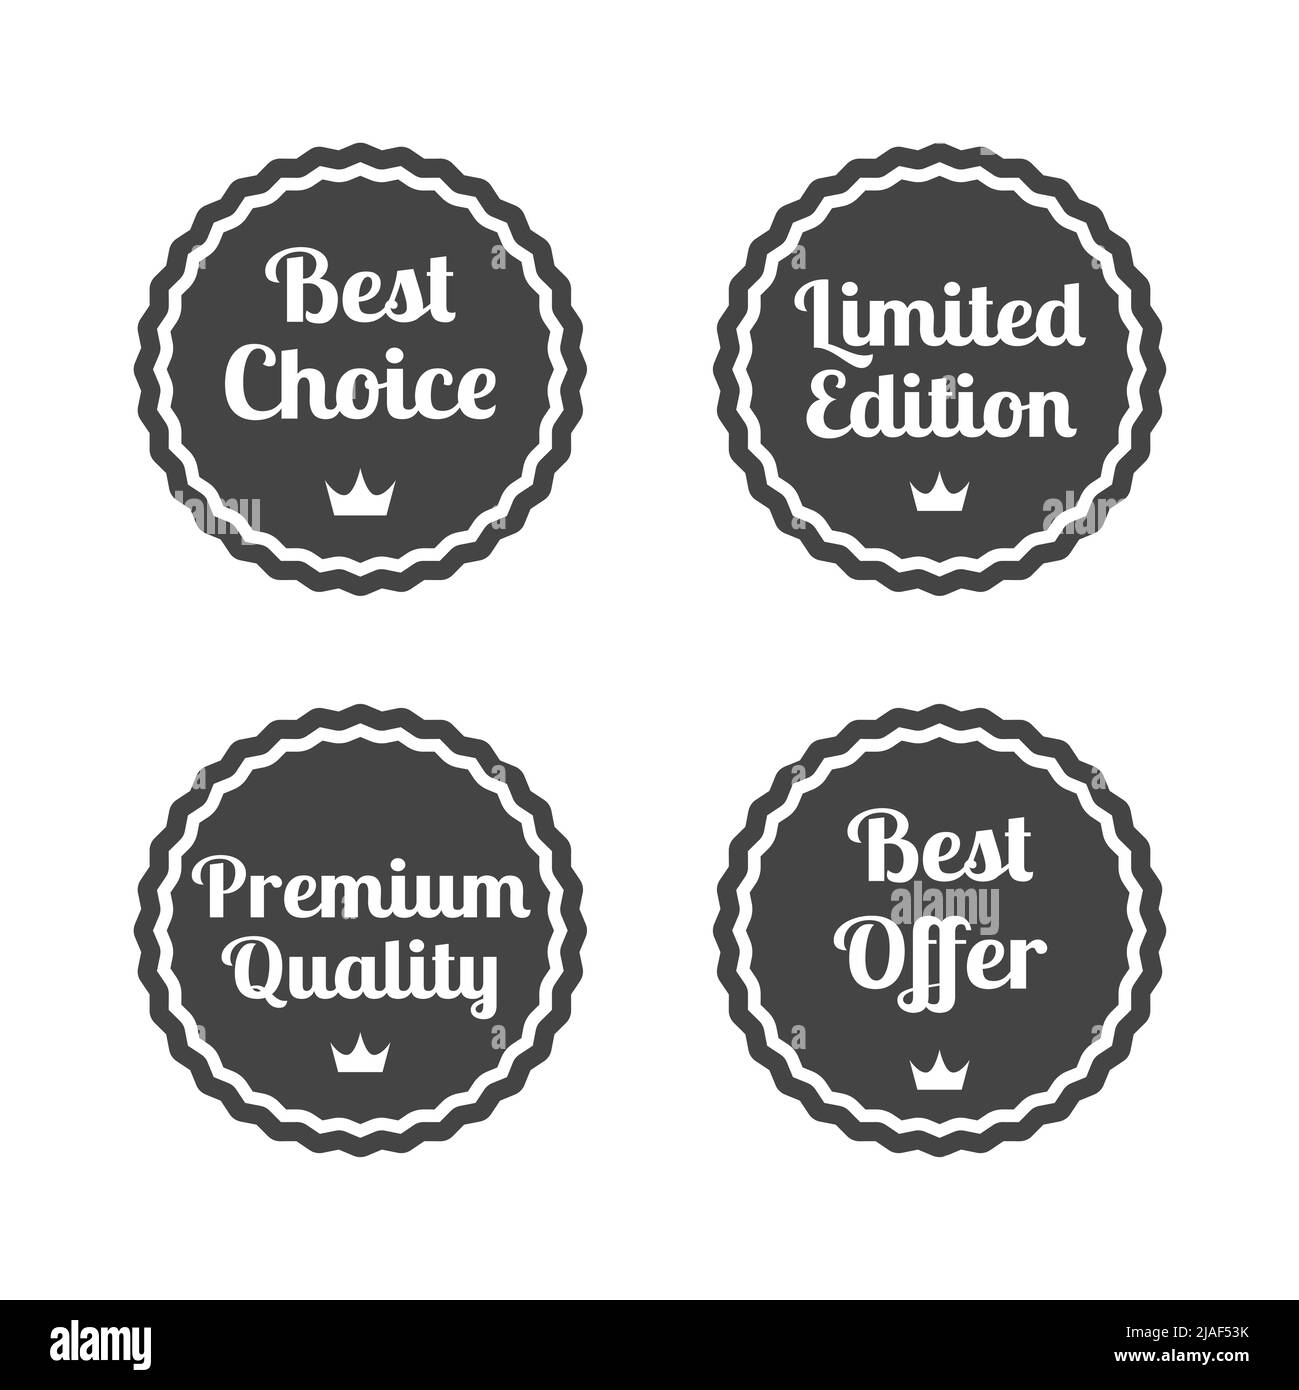 Premium quality and limited edition label badge set. Original product, best choice vector ribbon banner badges. Stock Vector